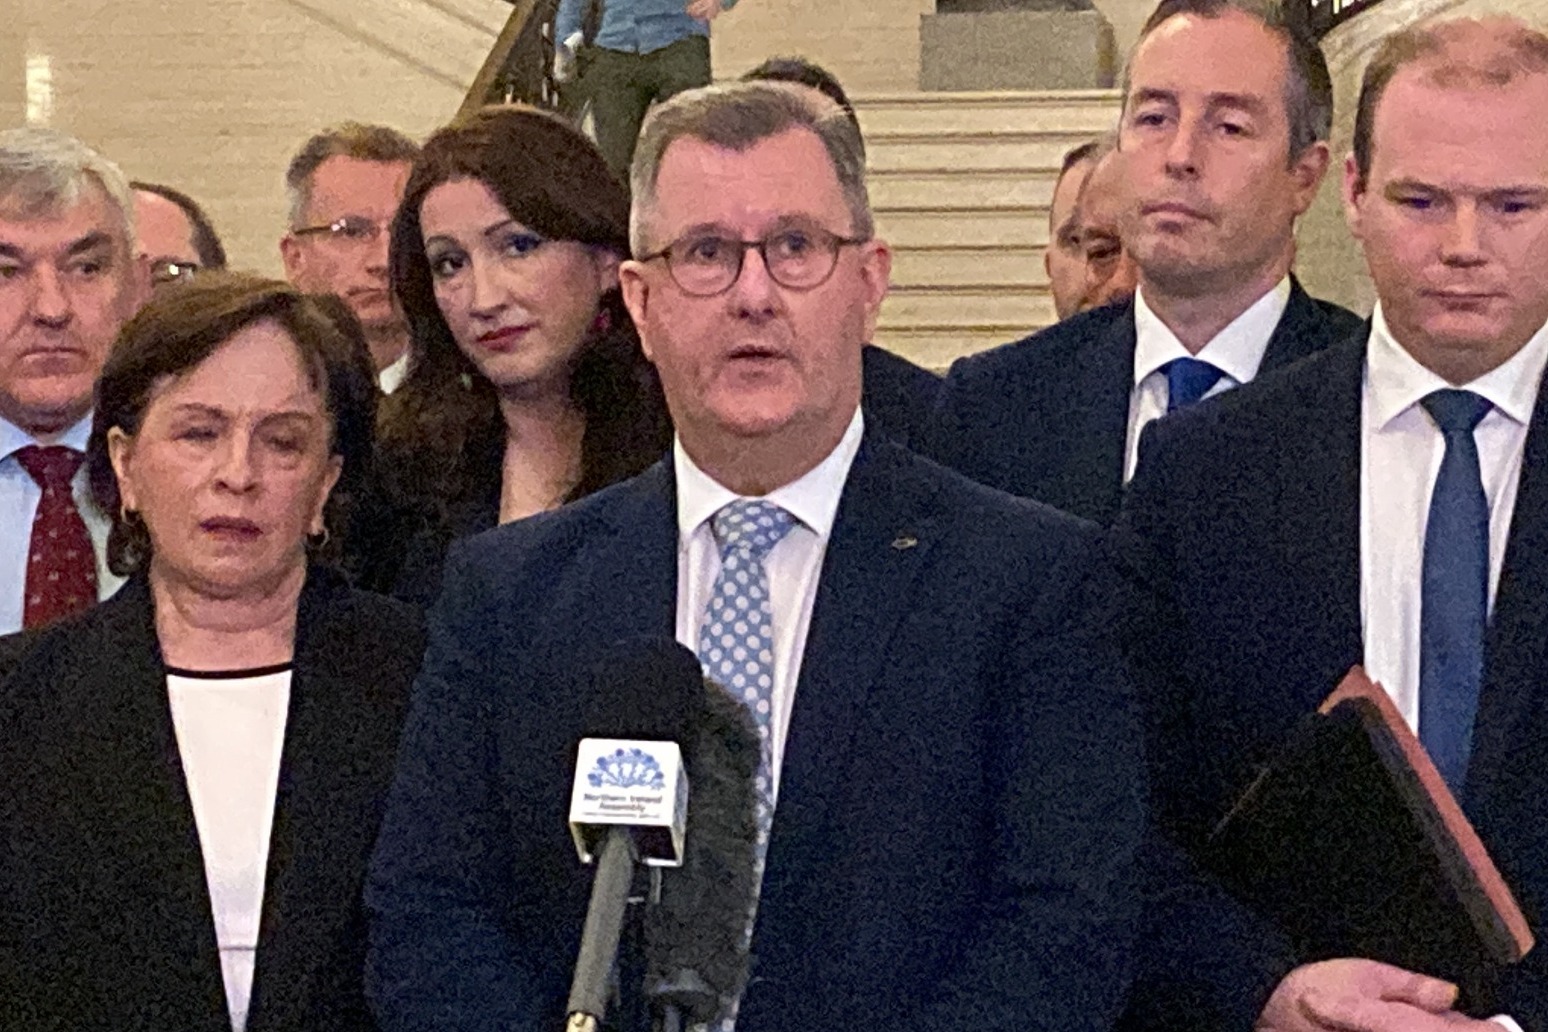 DUP confirms it will not nominate ministers to resurrect Stormont 